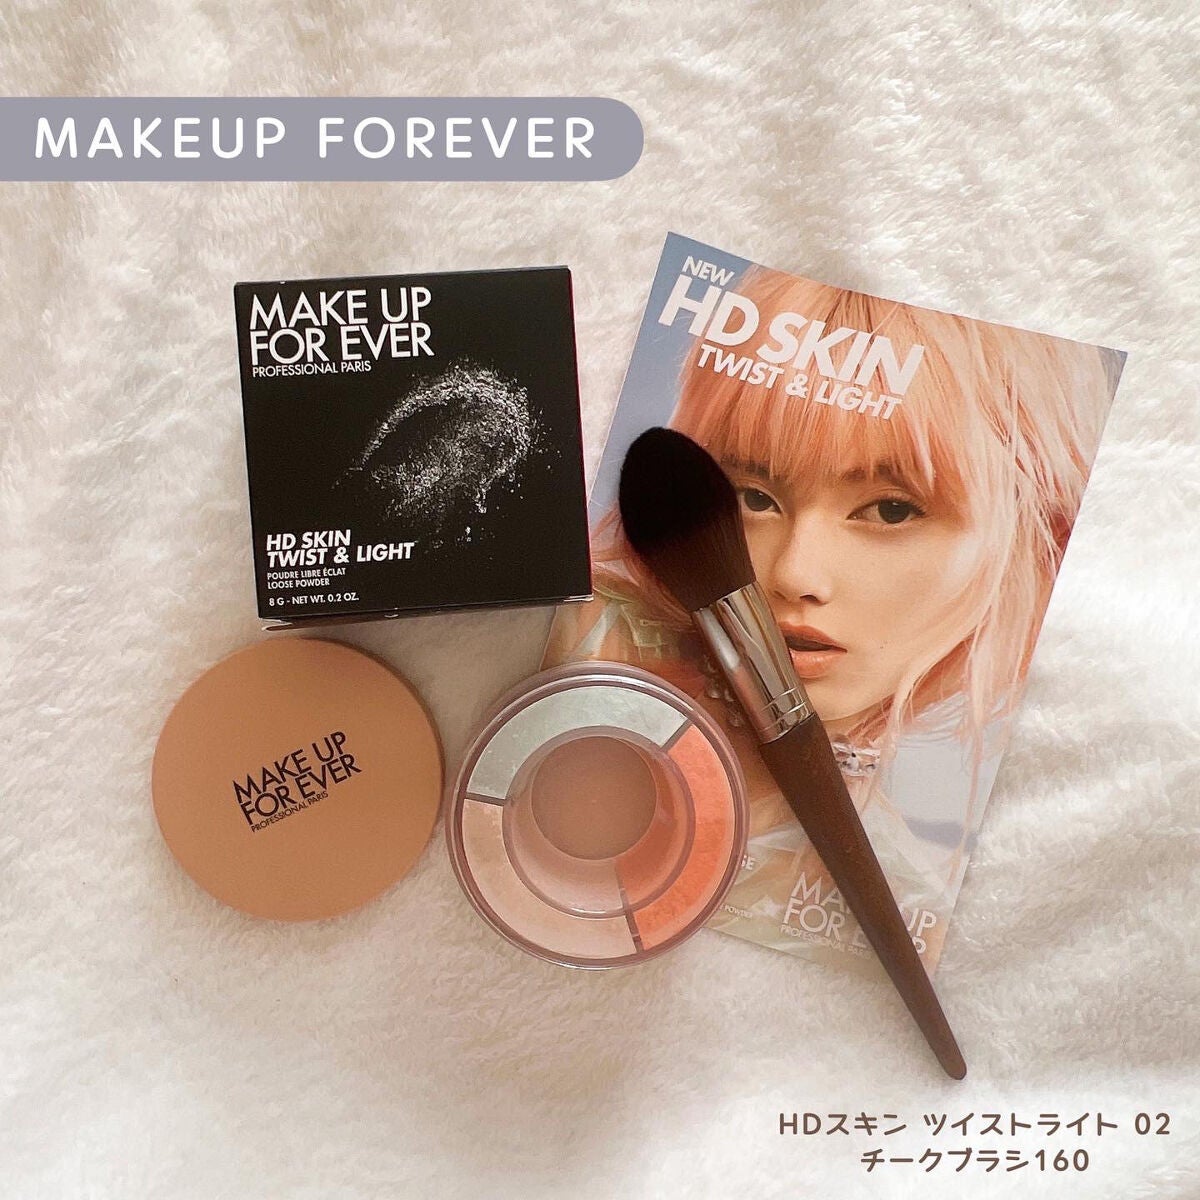 HDスキン ツイストライト｜MAKE UP FOR EVERの口コミ - 〖MAKE UP FOR